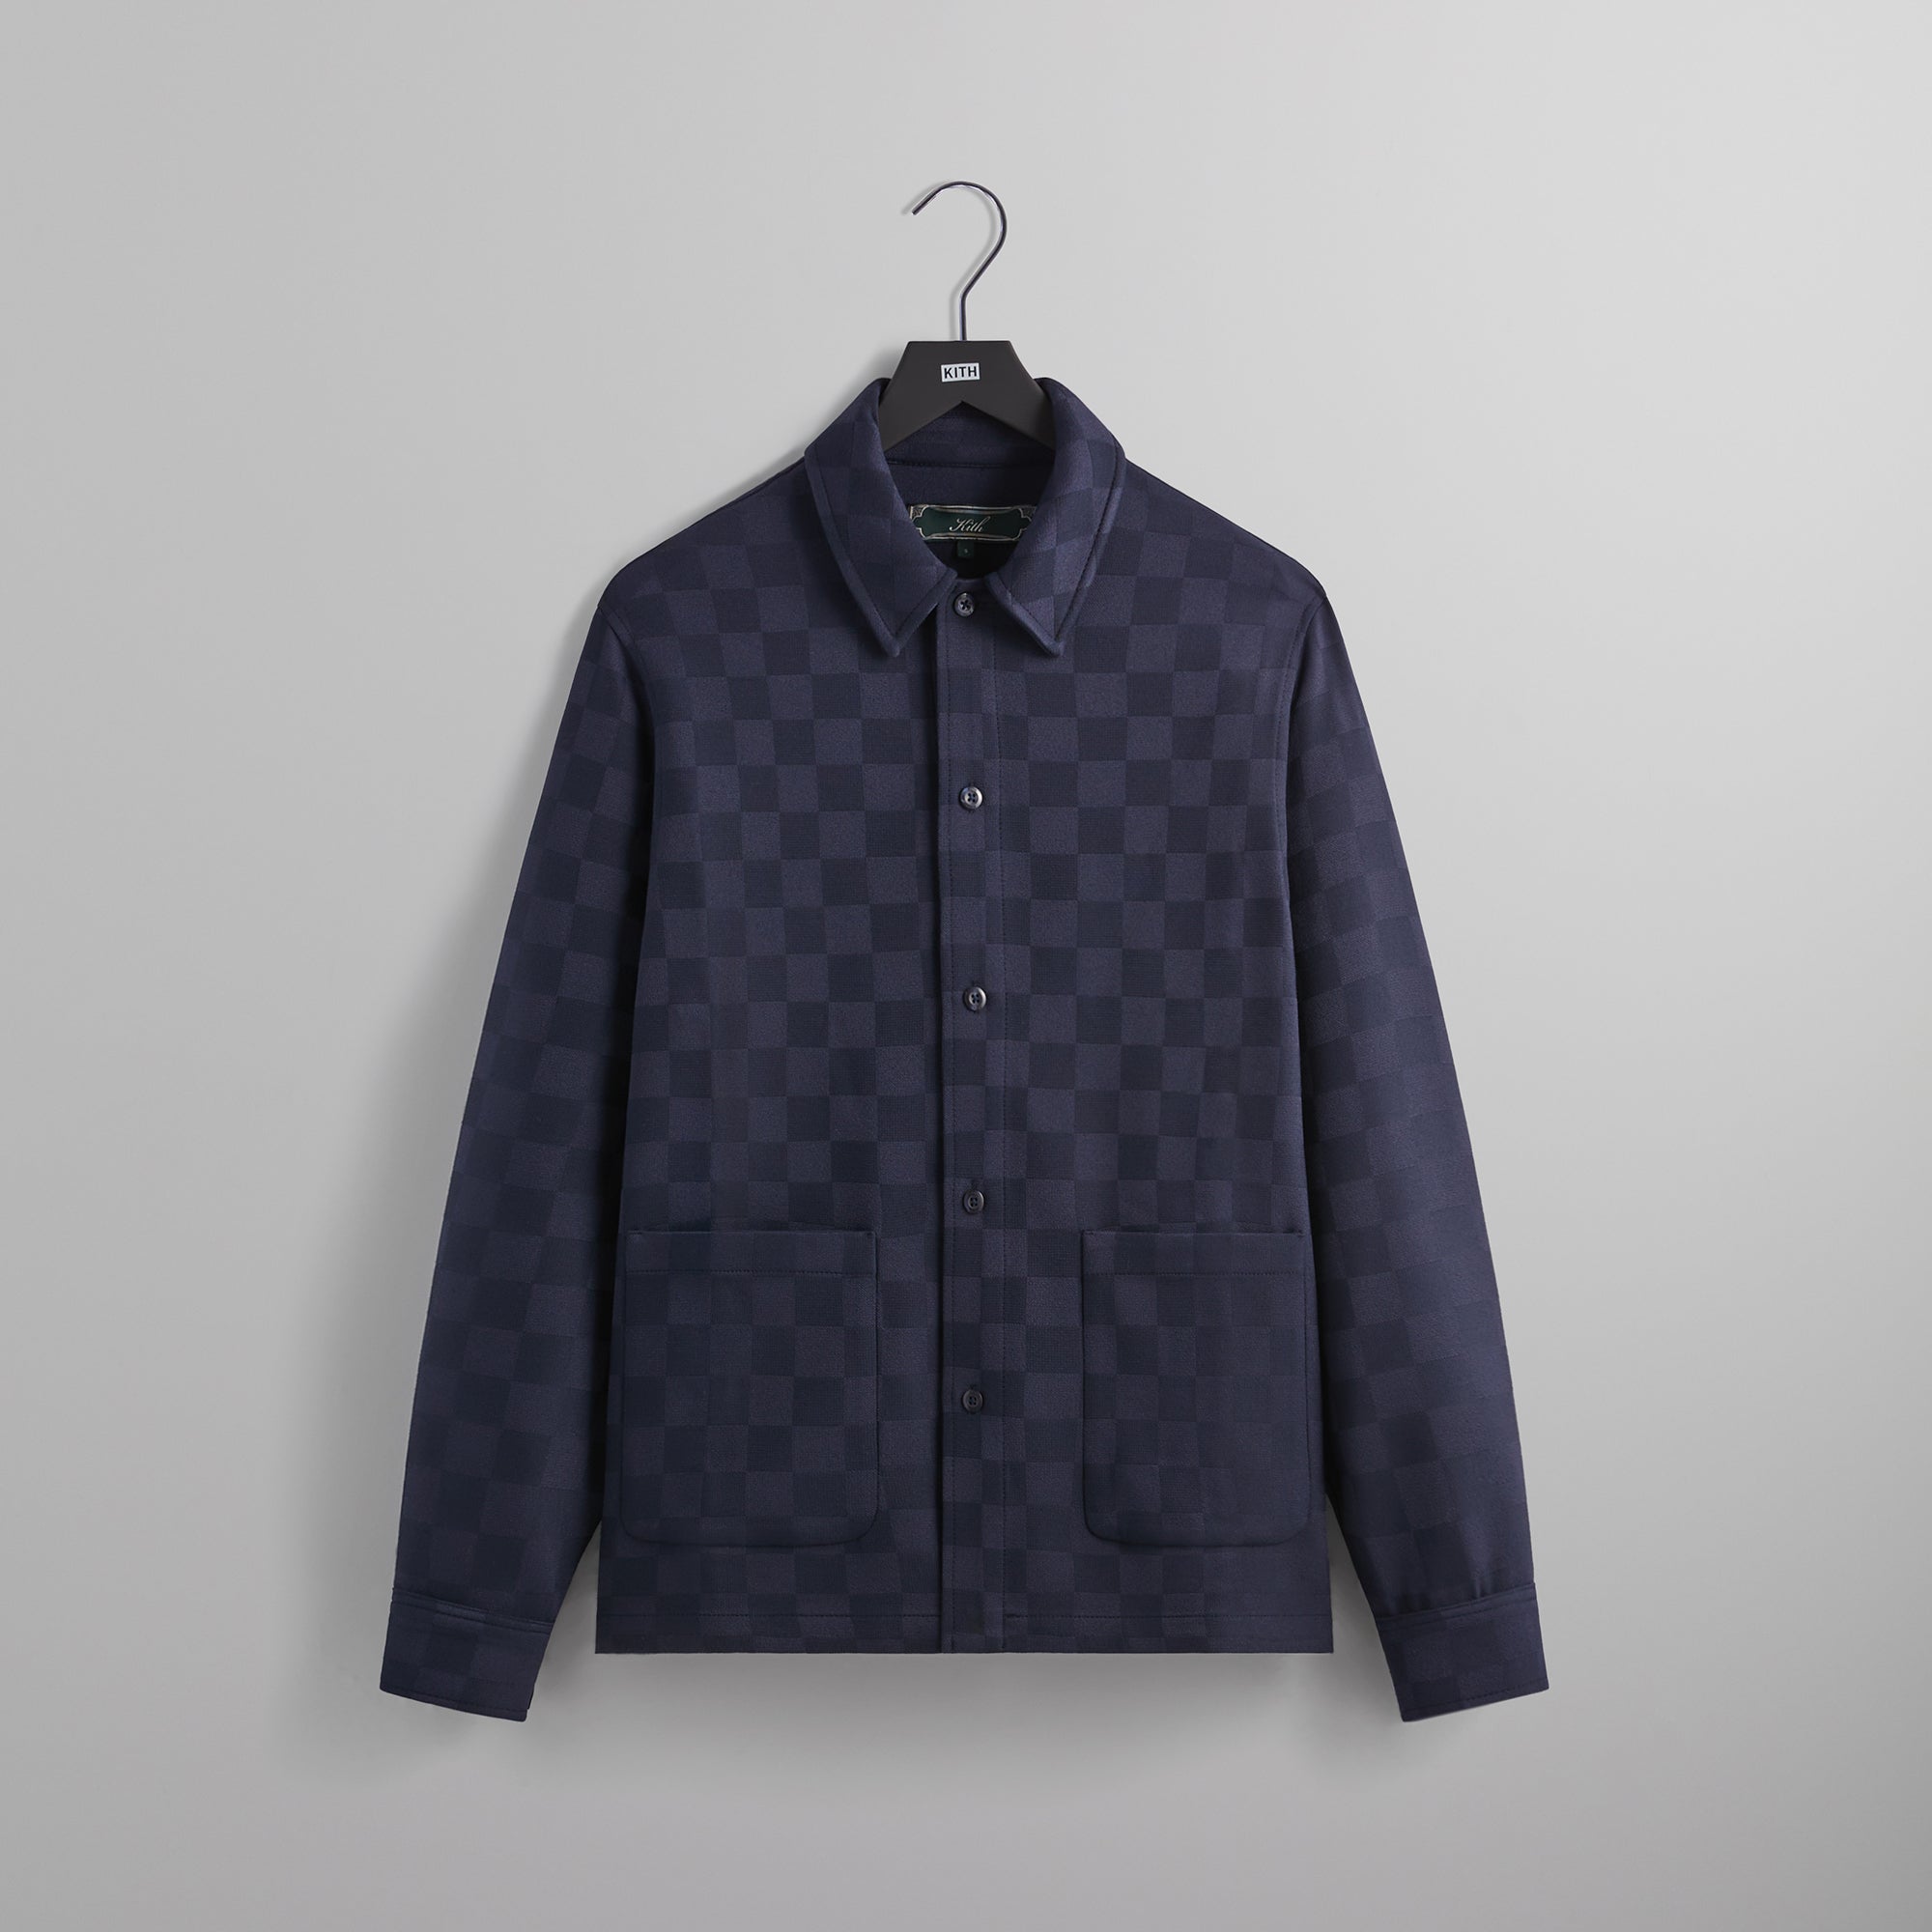 Kith Boxy Collared Overshirt - Nocturnal